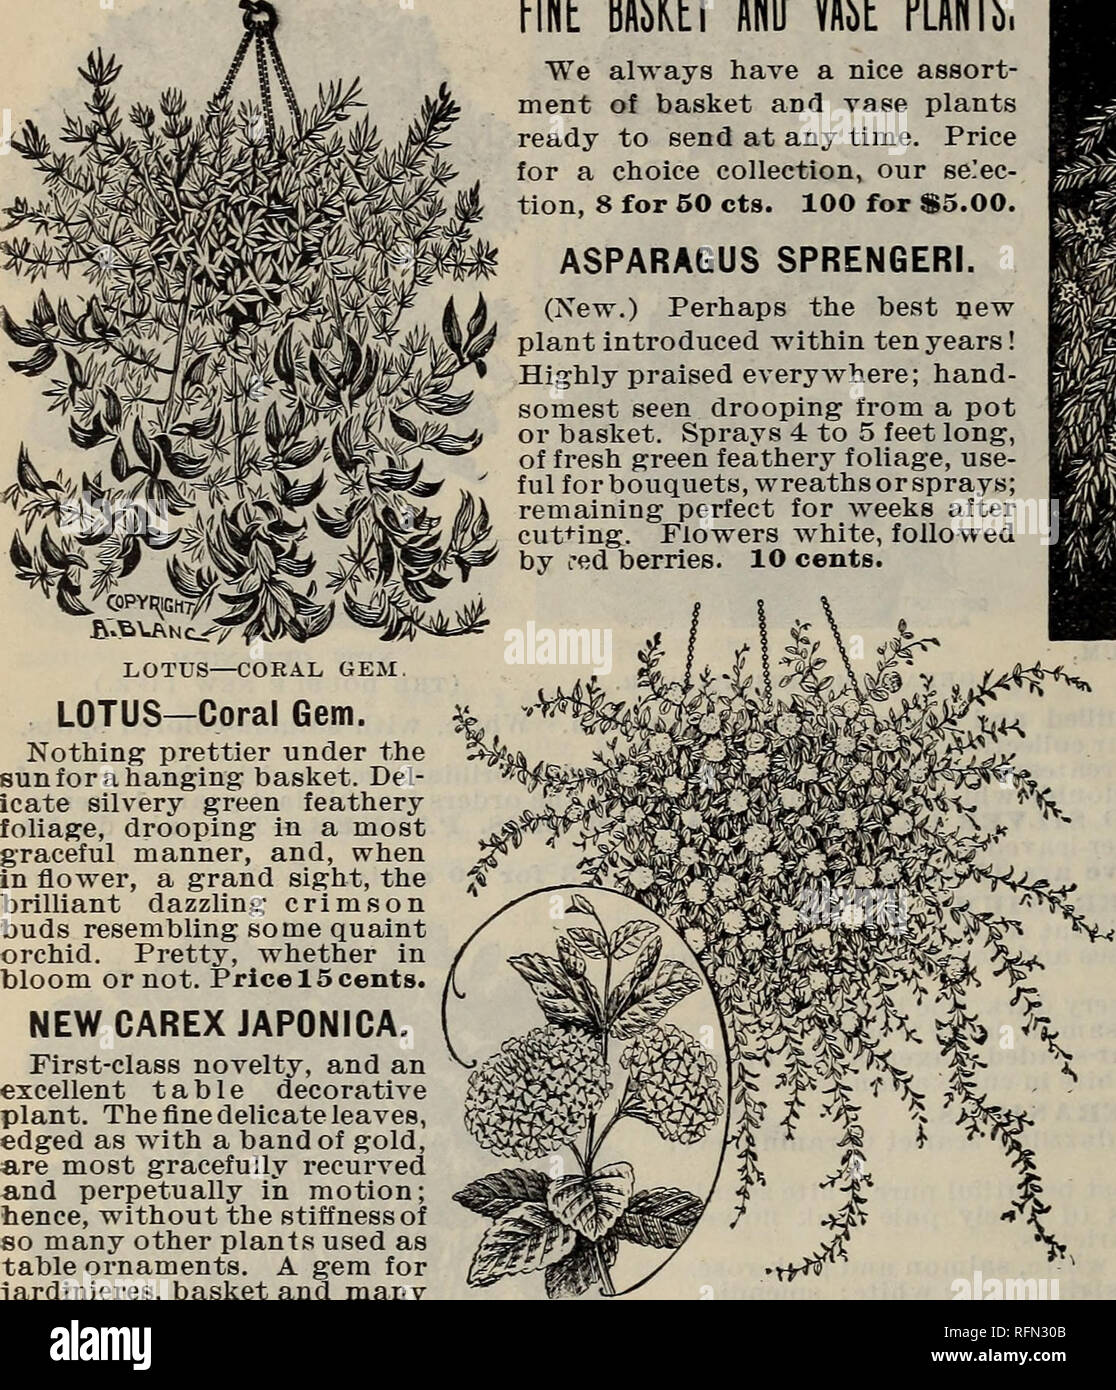 . New and rare plants, bulbs, fruits. Nursery stock New York (State) Catalogs; Vegetables Seeds Catalogs; Flowers Seeds Catalogs; Plants, Ornamental Catalogs; Fruit Catalogs. LOTUS—CORAL GEM. LOTUS—Coral Gem. Nothing prettier under the «un for a hanging basket. Del- icate silvery green feathery foliage, drooping in a most graceful manner, and, when in flower, a grand sight, the brilliant dazzling crimson buds resembling some quaint orchid. Pretty, whether in bloom or not. Price 15 cents. NEW CAREX JAPONICA. First-class novelty, and an excellent table decorative plant. The fine delicate leaves, Stock Photo